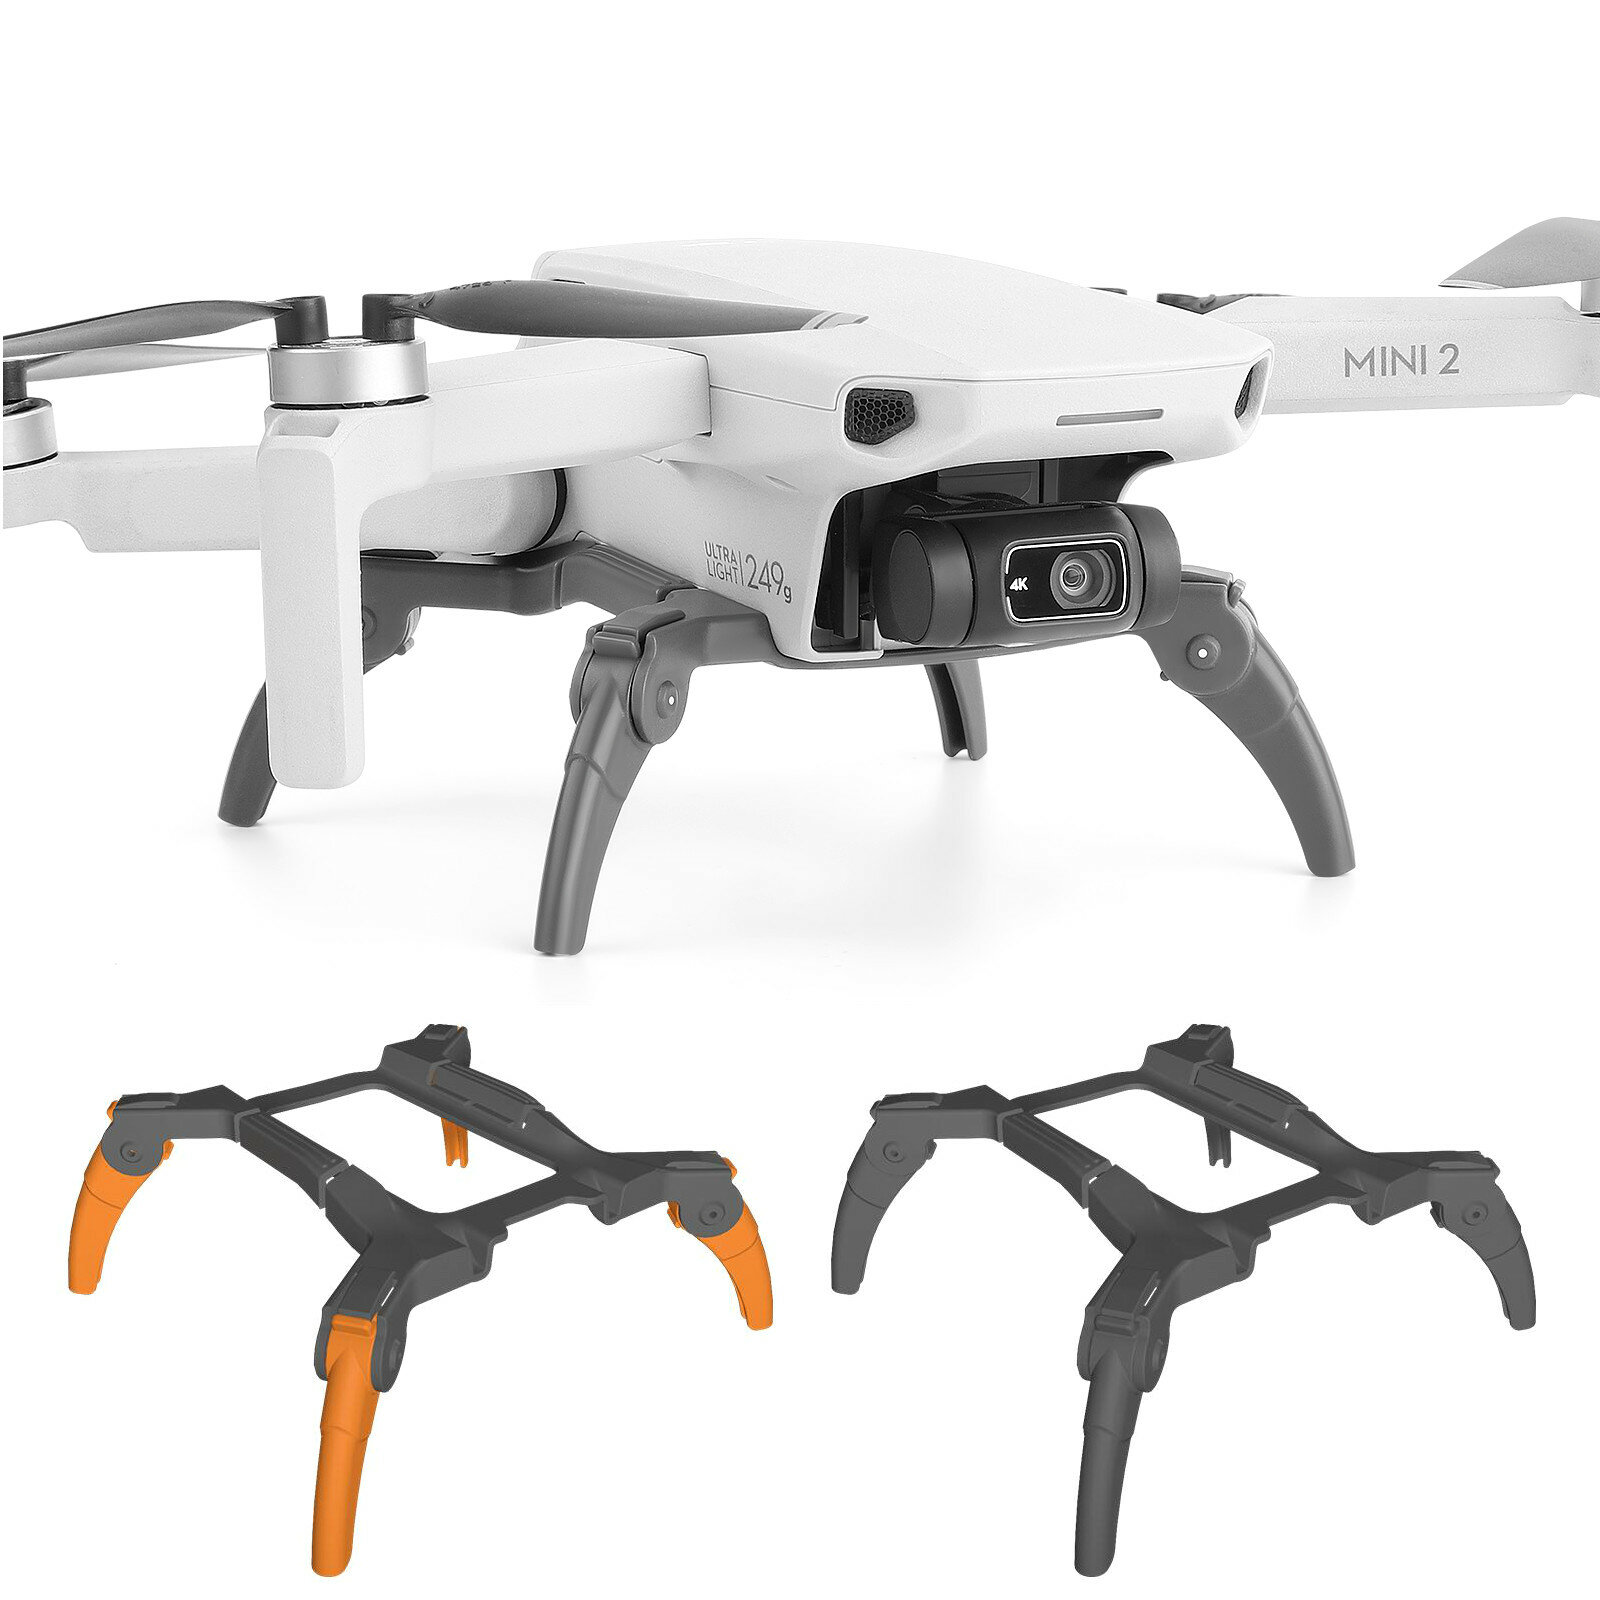 Sunnylife Foldable Extended Heightening Spider Landing Gear Legs Protector Support for DJI Mini 2 / 